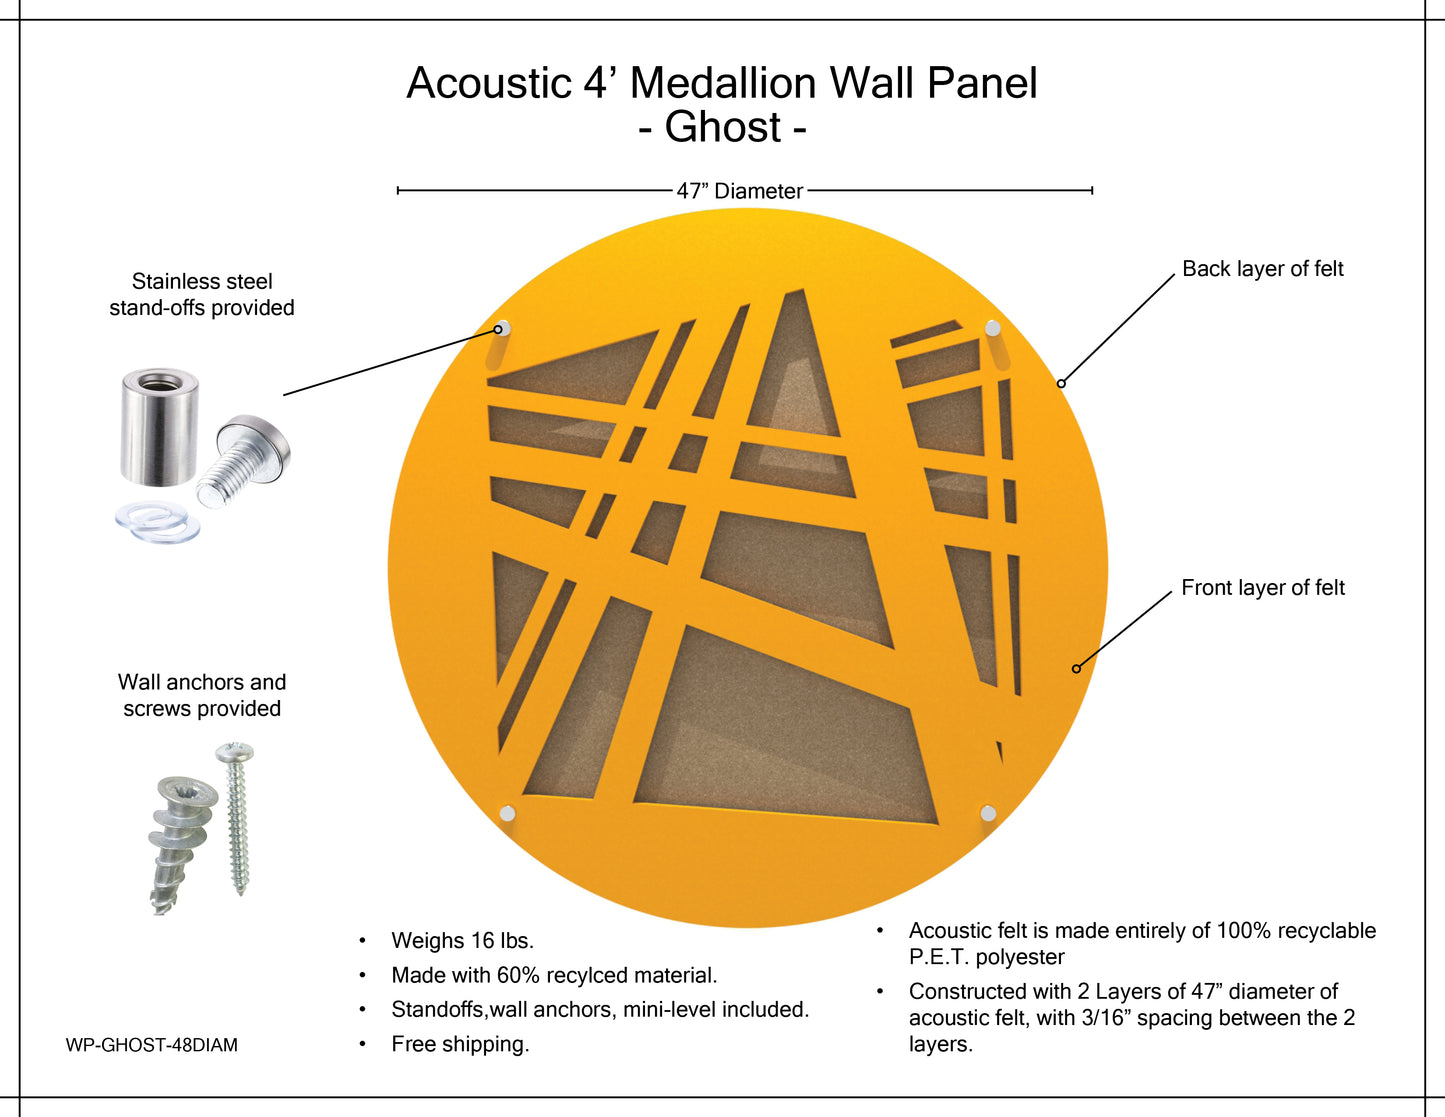 Medallion Acoustic Wall Panel - Ghost